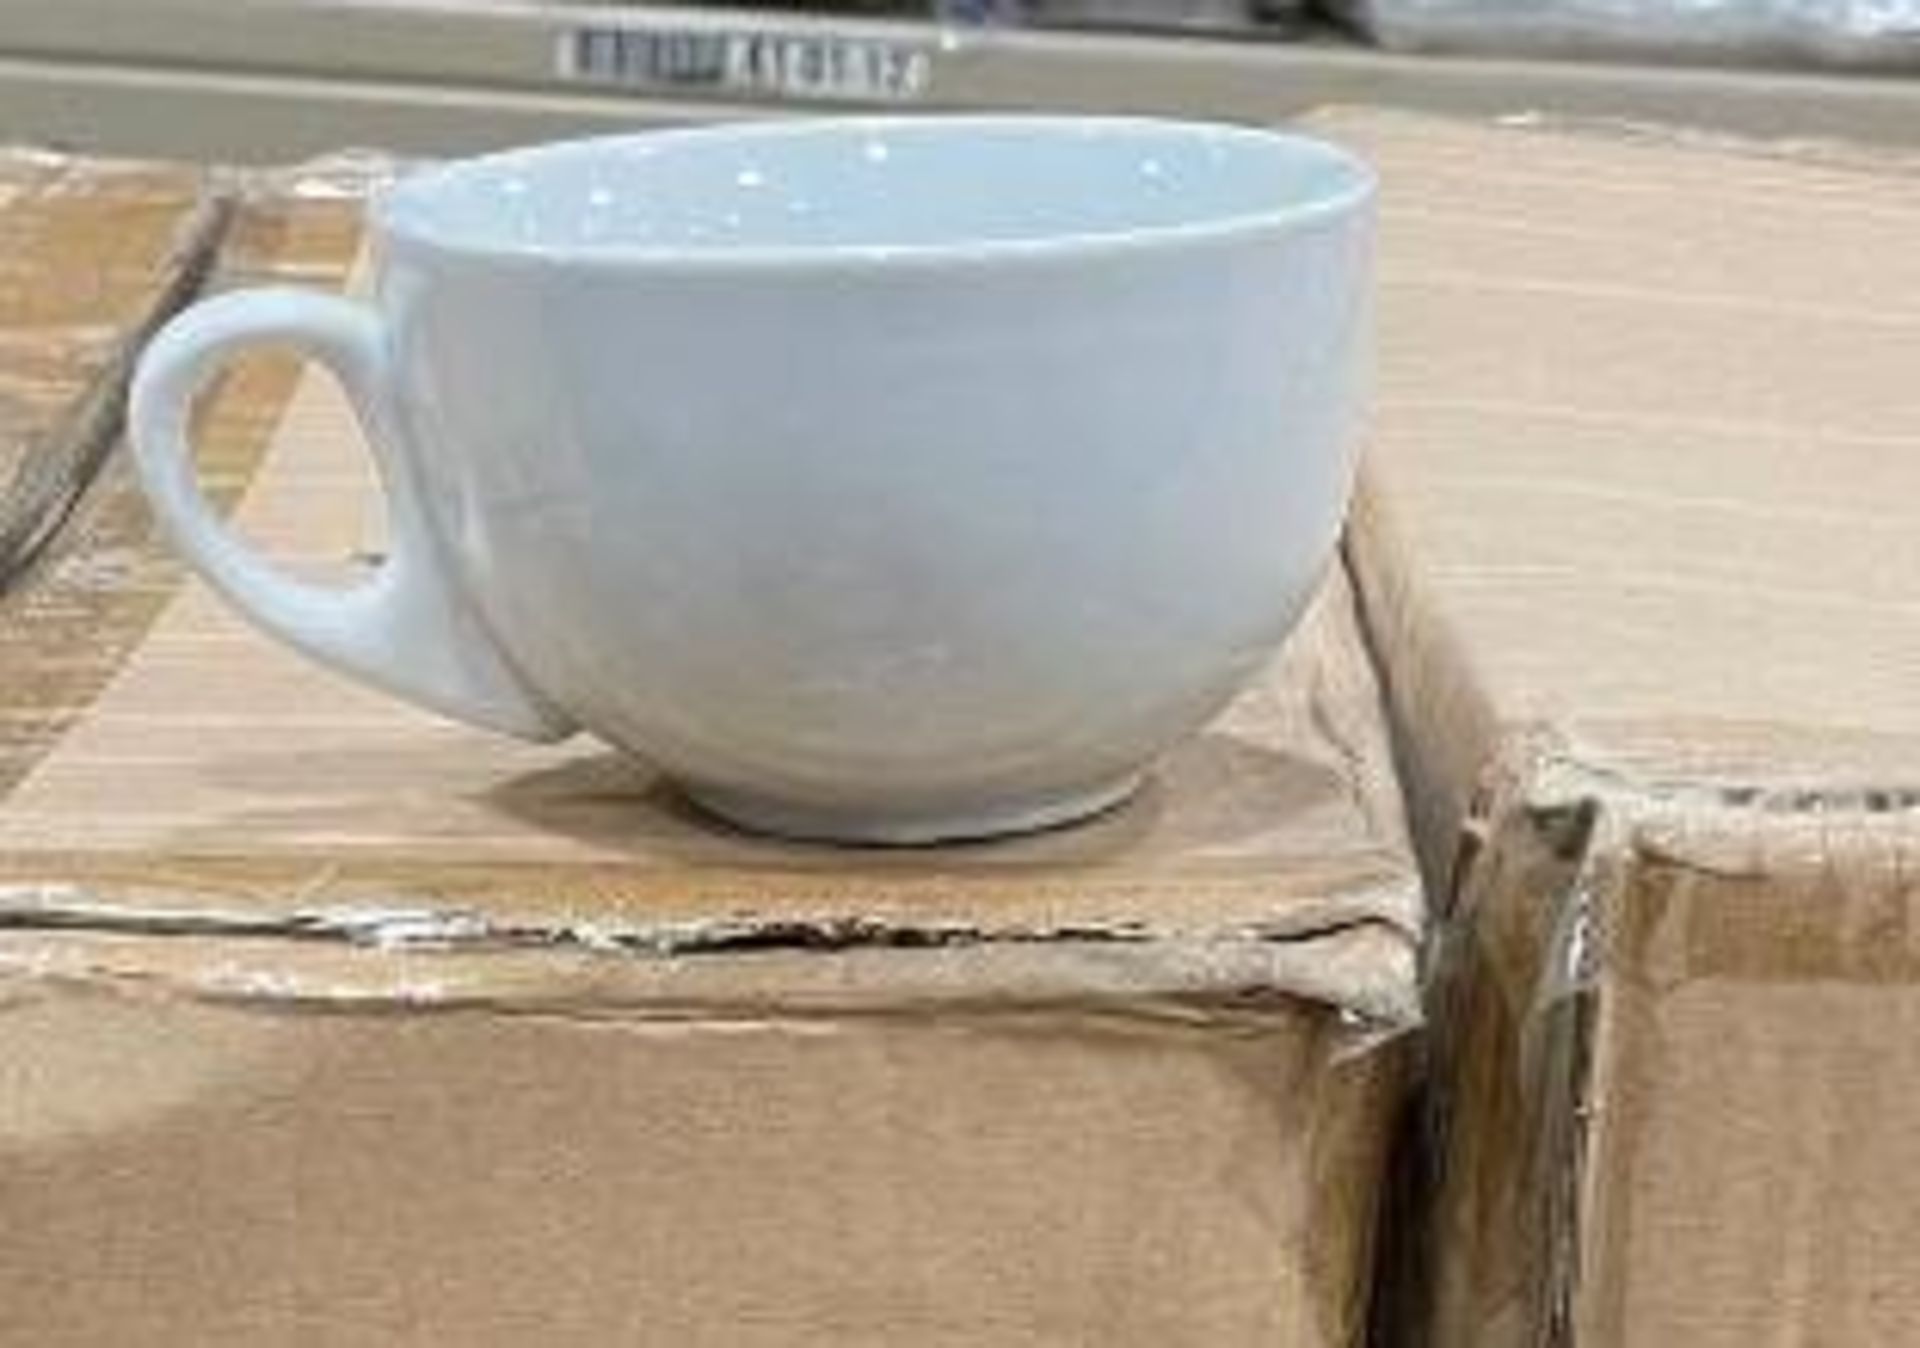 2 CASES OF 7 OZ. TAPERED COFFEE CUP, 72/CASE, JOHNSON ROSE 90181 - NEW - Image 2 of 4